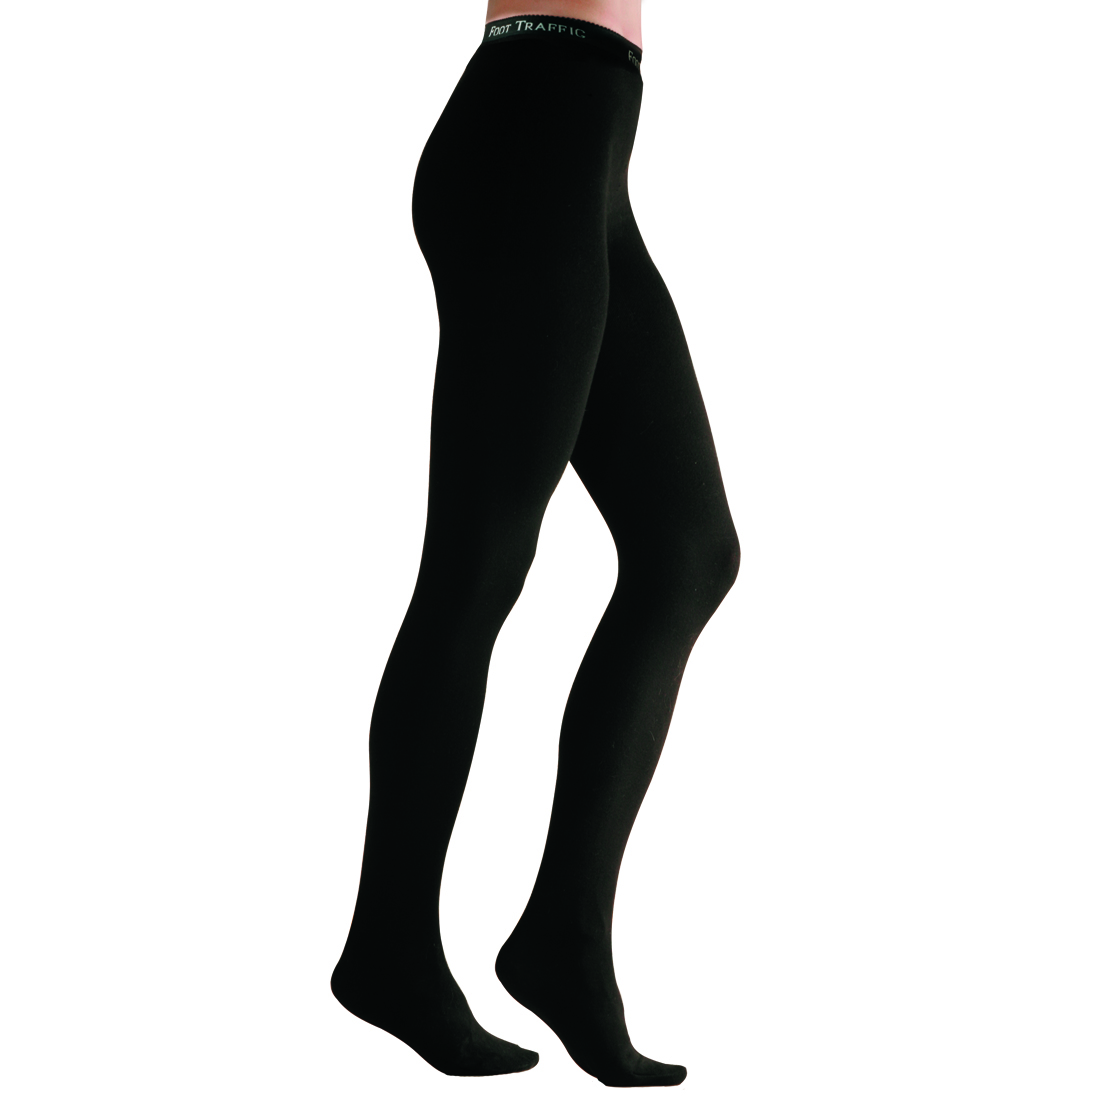 Buy Quality Tights for Women - Hosiery Online